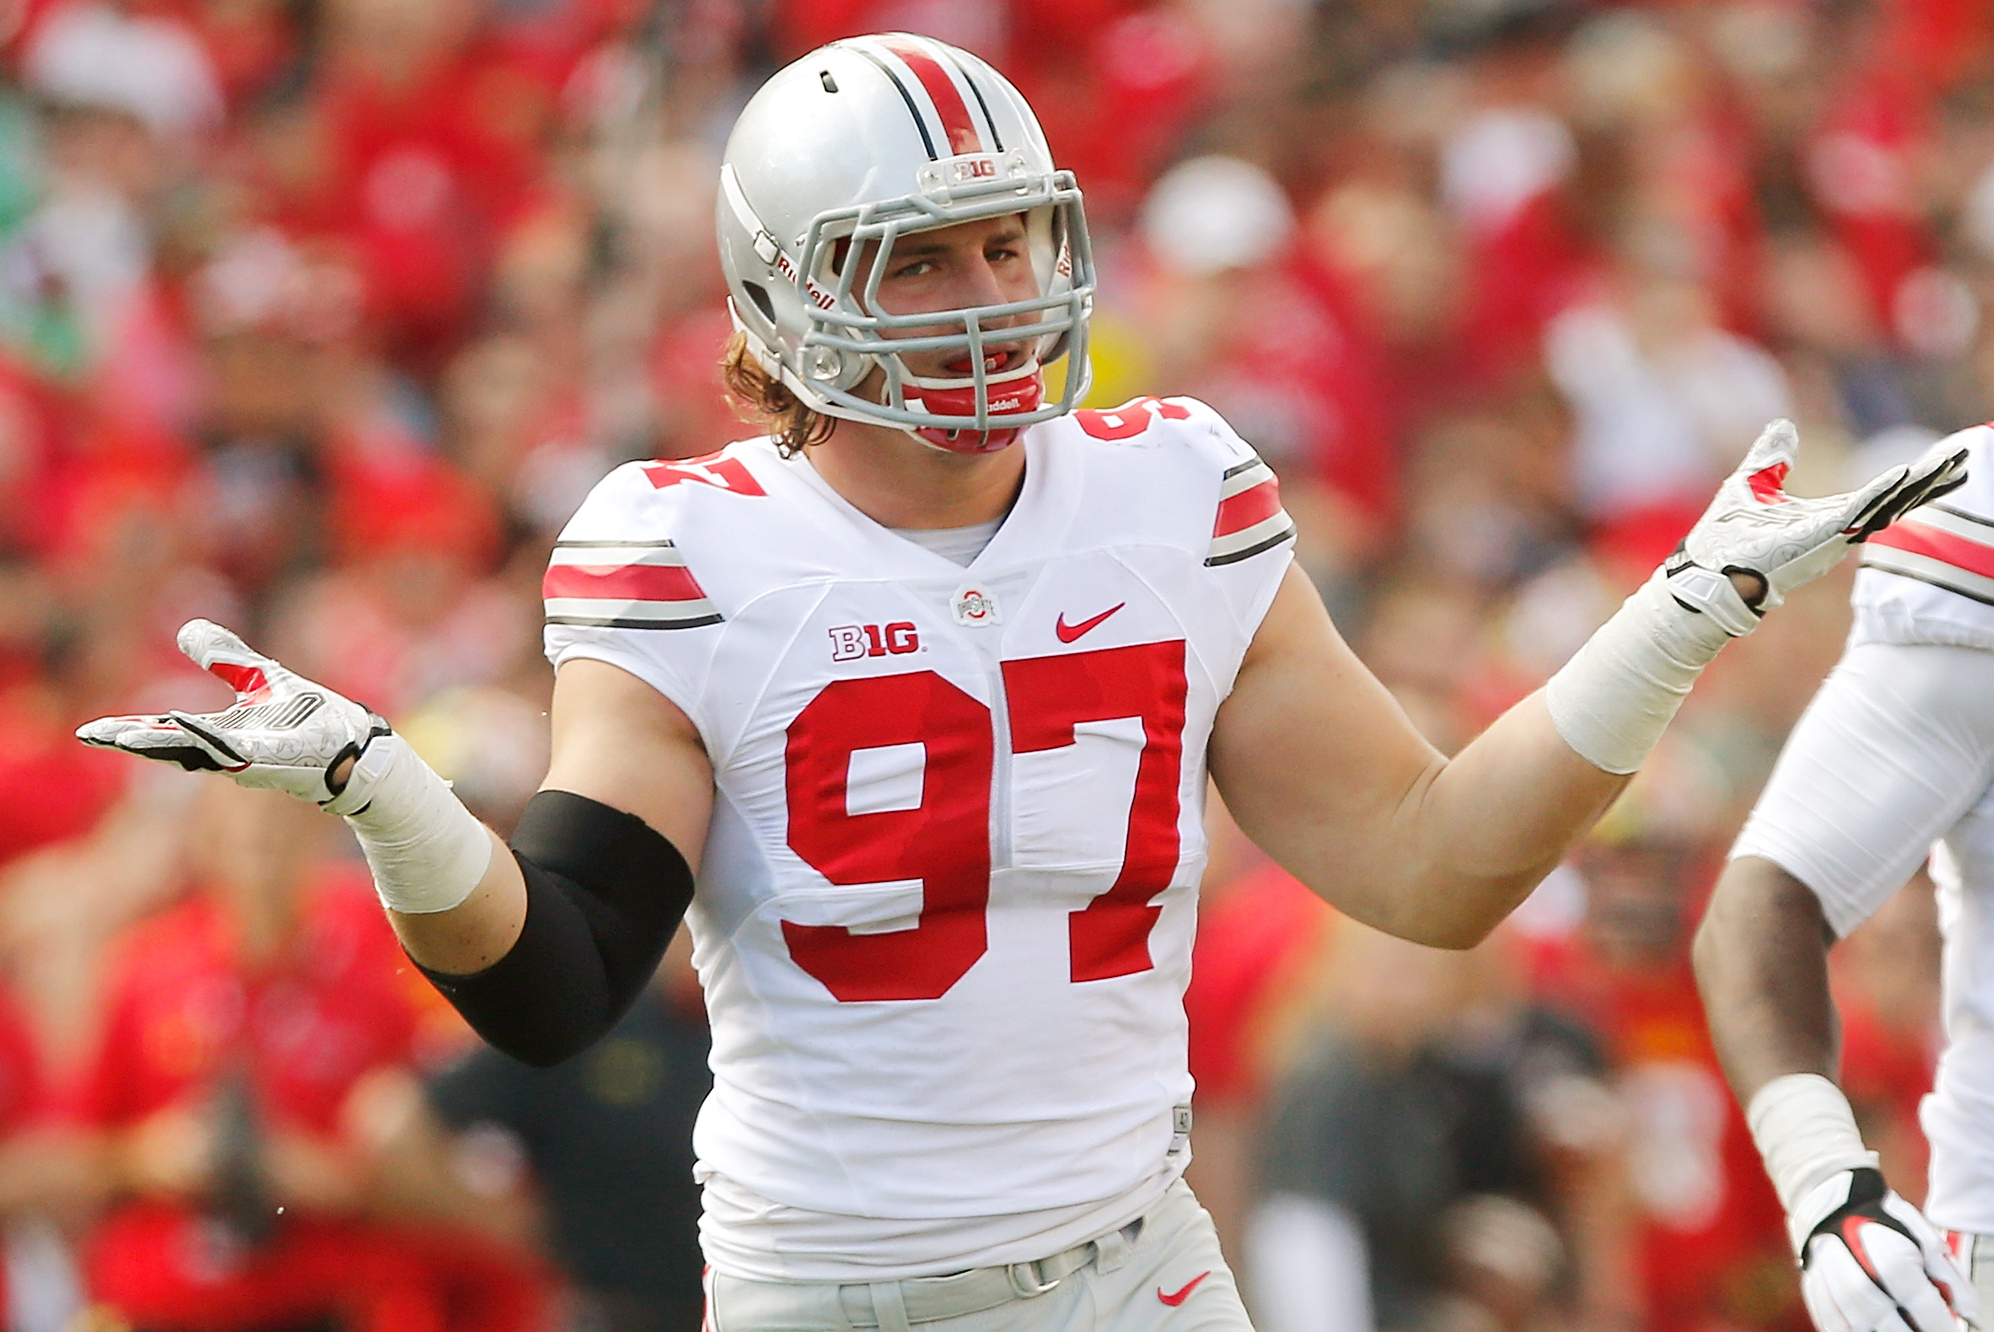 Nick and Joey Bosa: brothers investment in themselves is paying